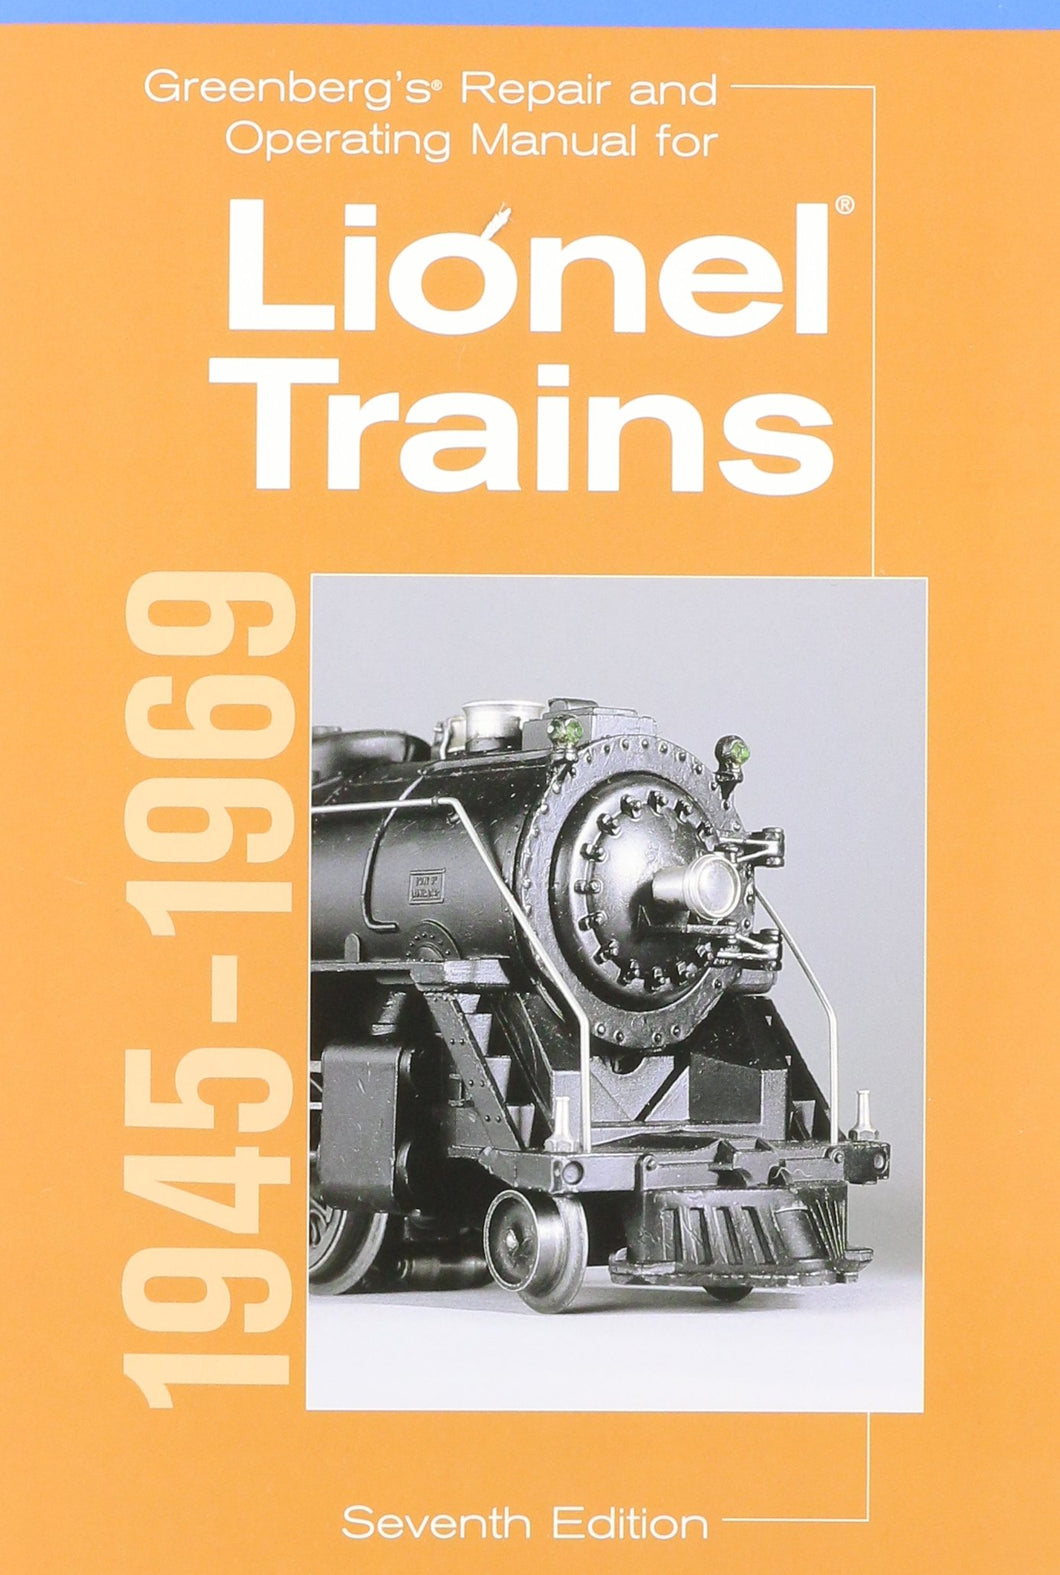 Greenberg's Repair and Operating Manual for Lionel Trains 1945-1969  #10-8160 7e